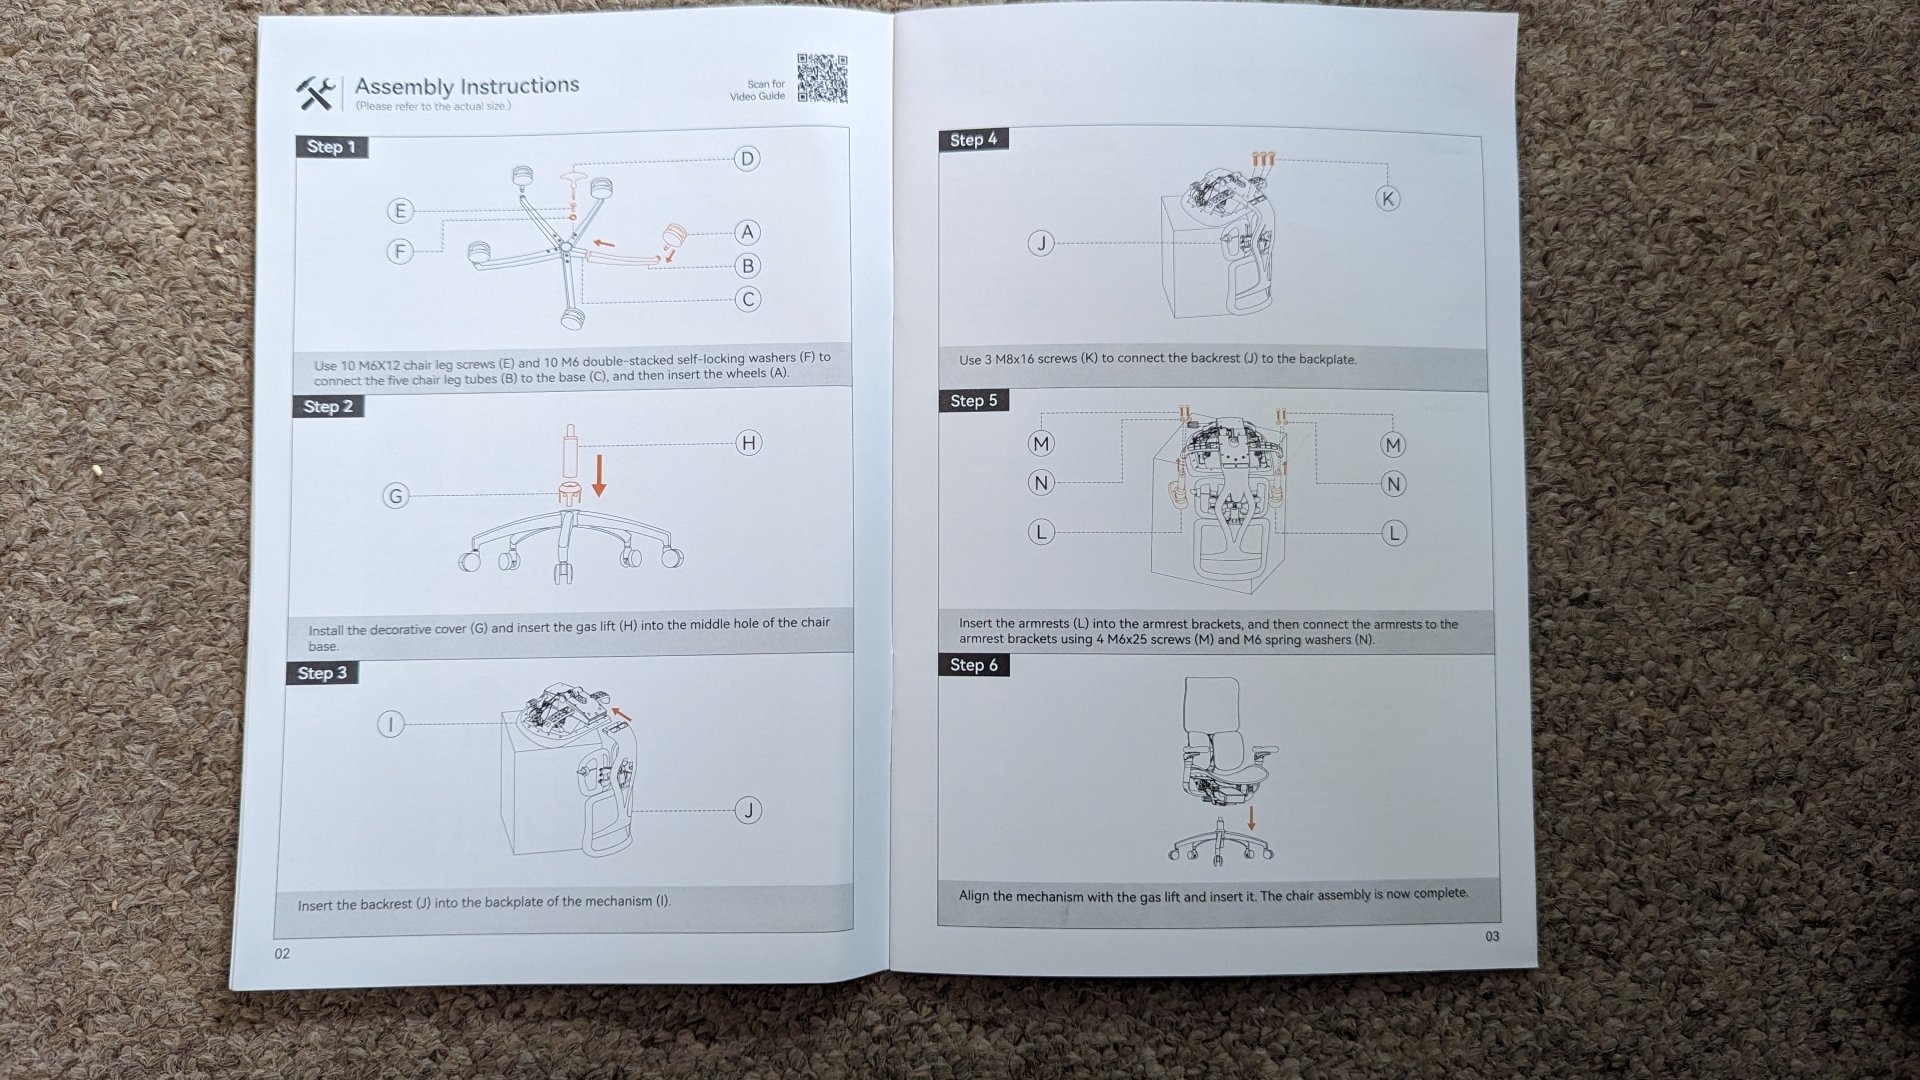 Sihoo S300 ergonomic office chair review image showing the assembly instructions.